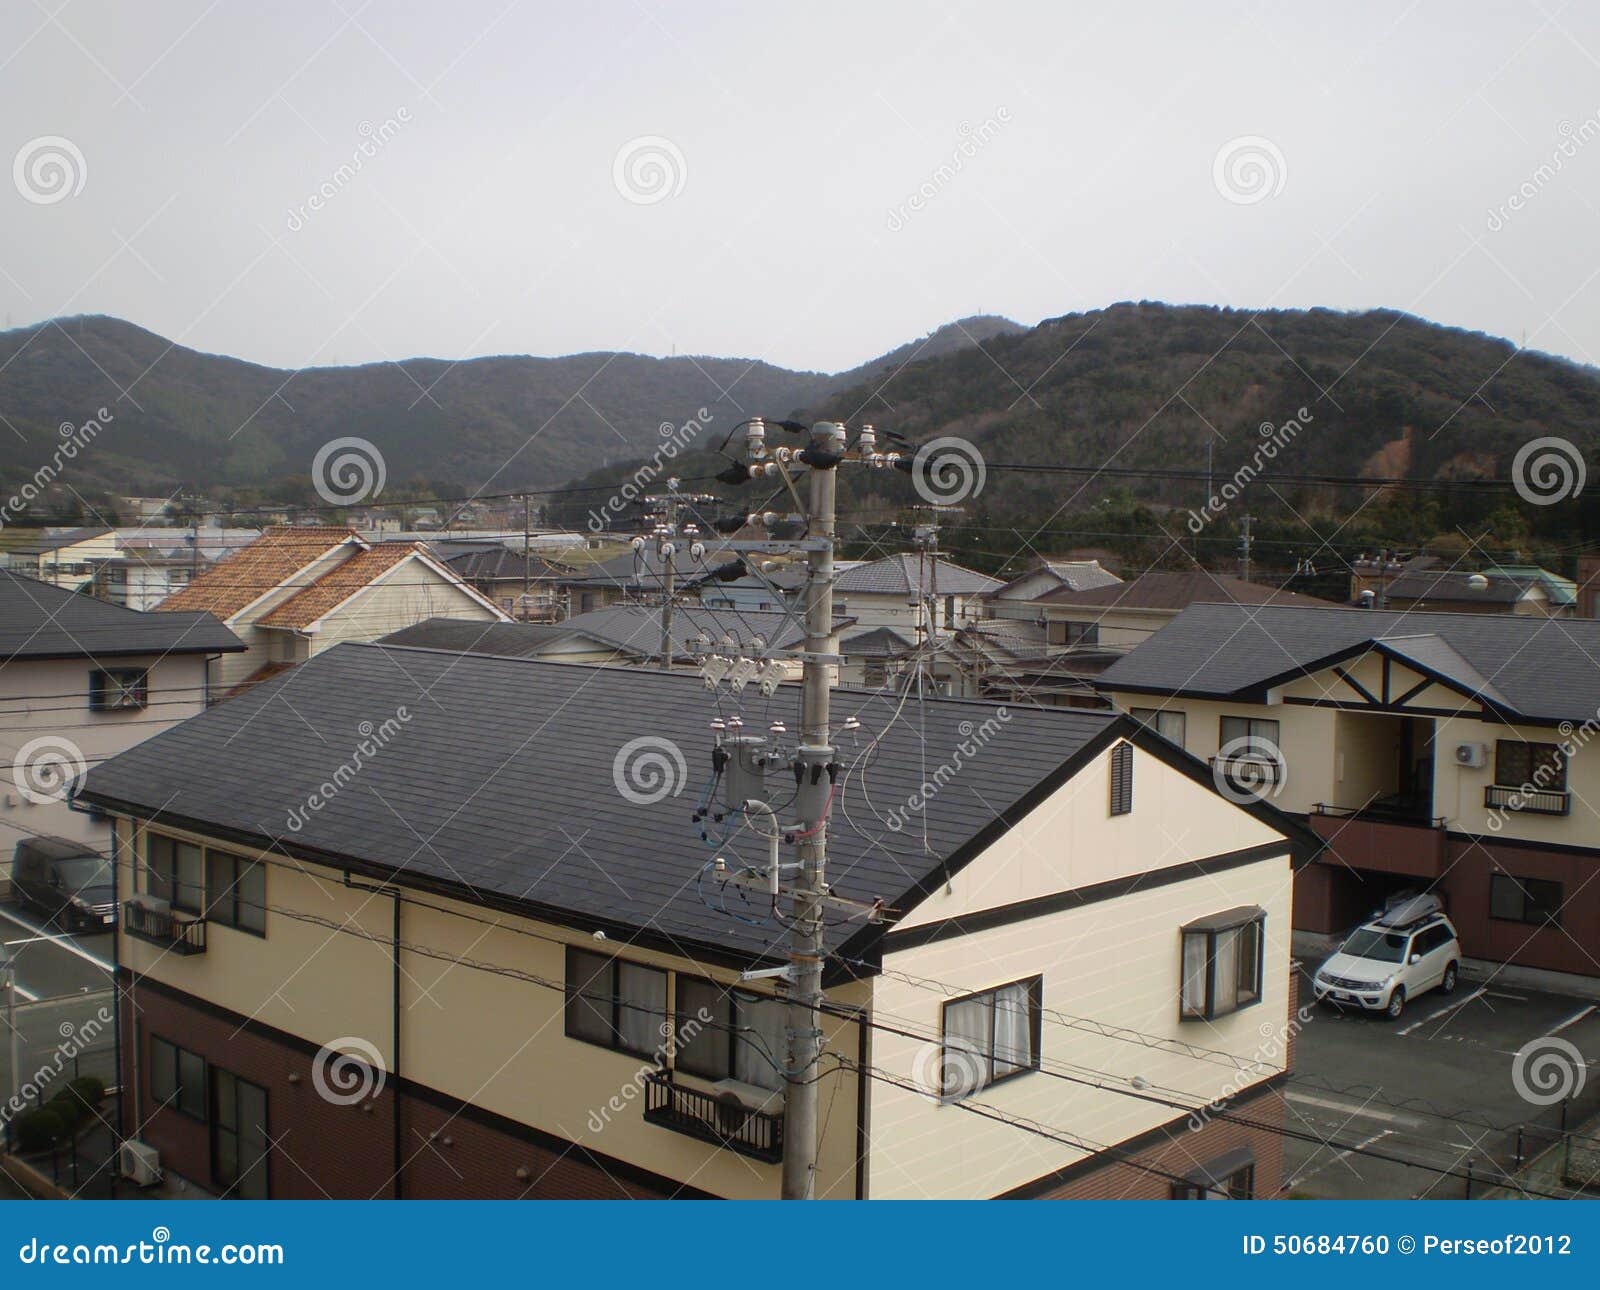 power pole and homes (japan)